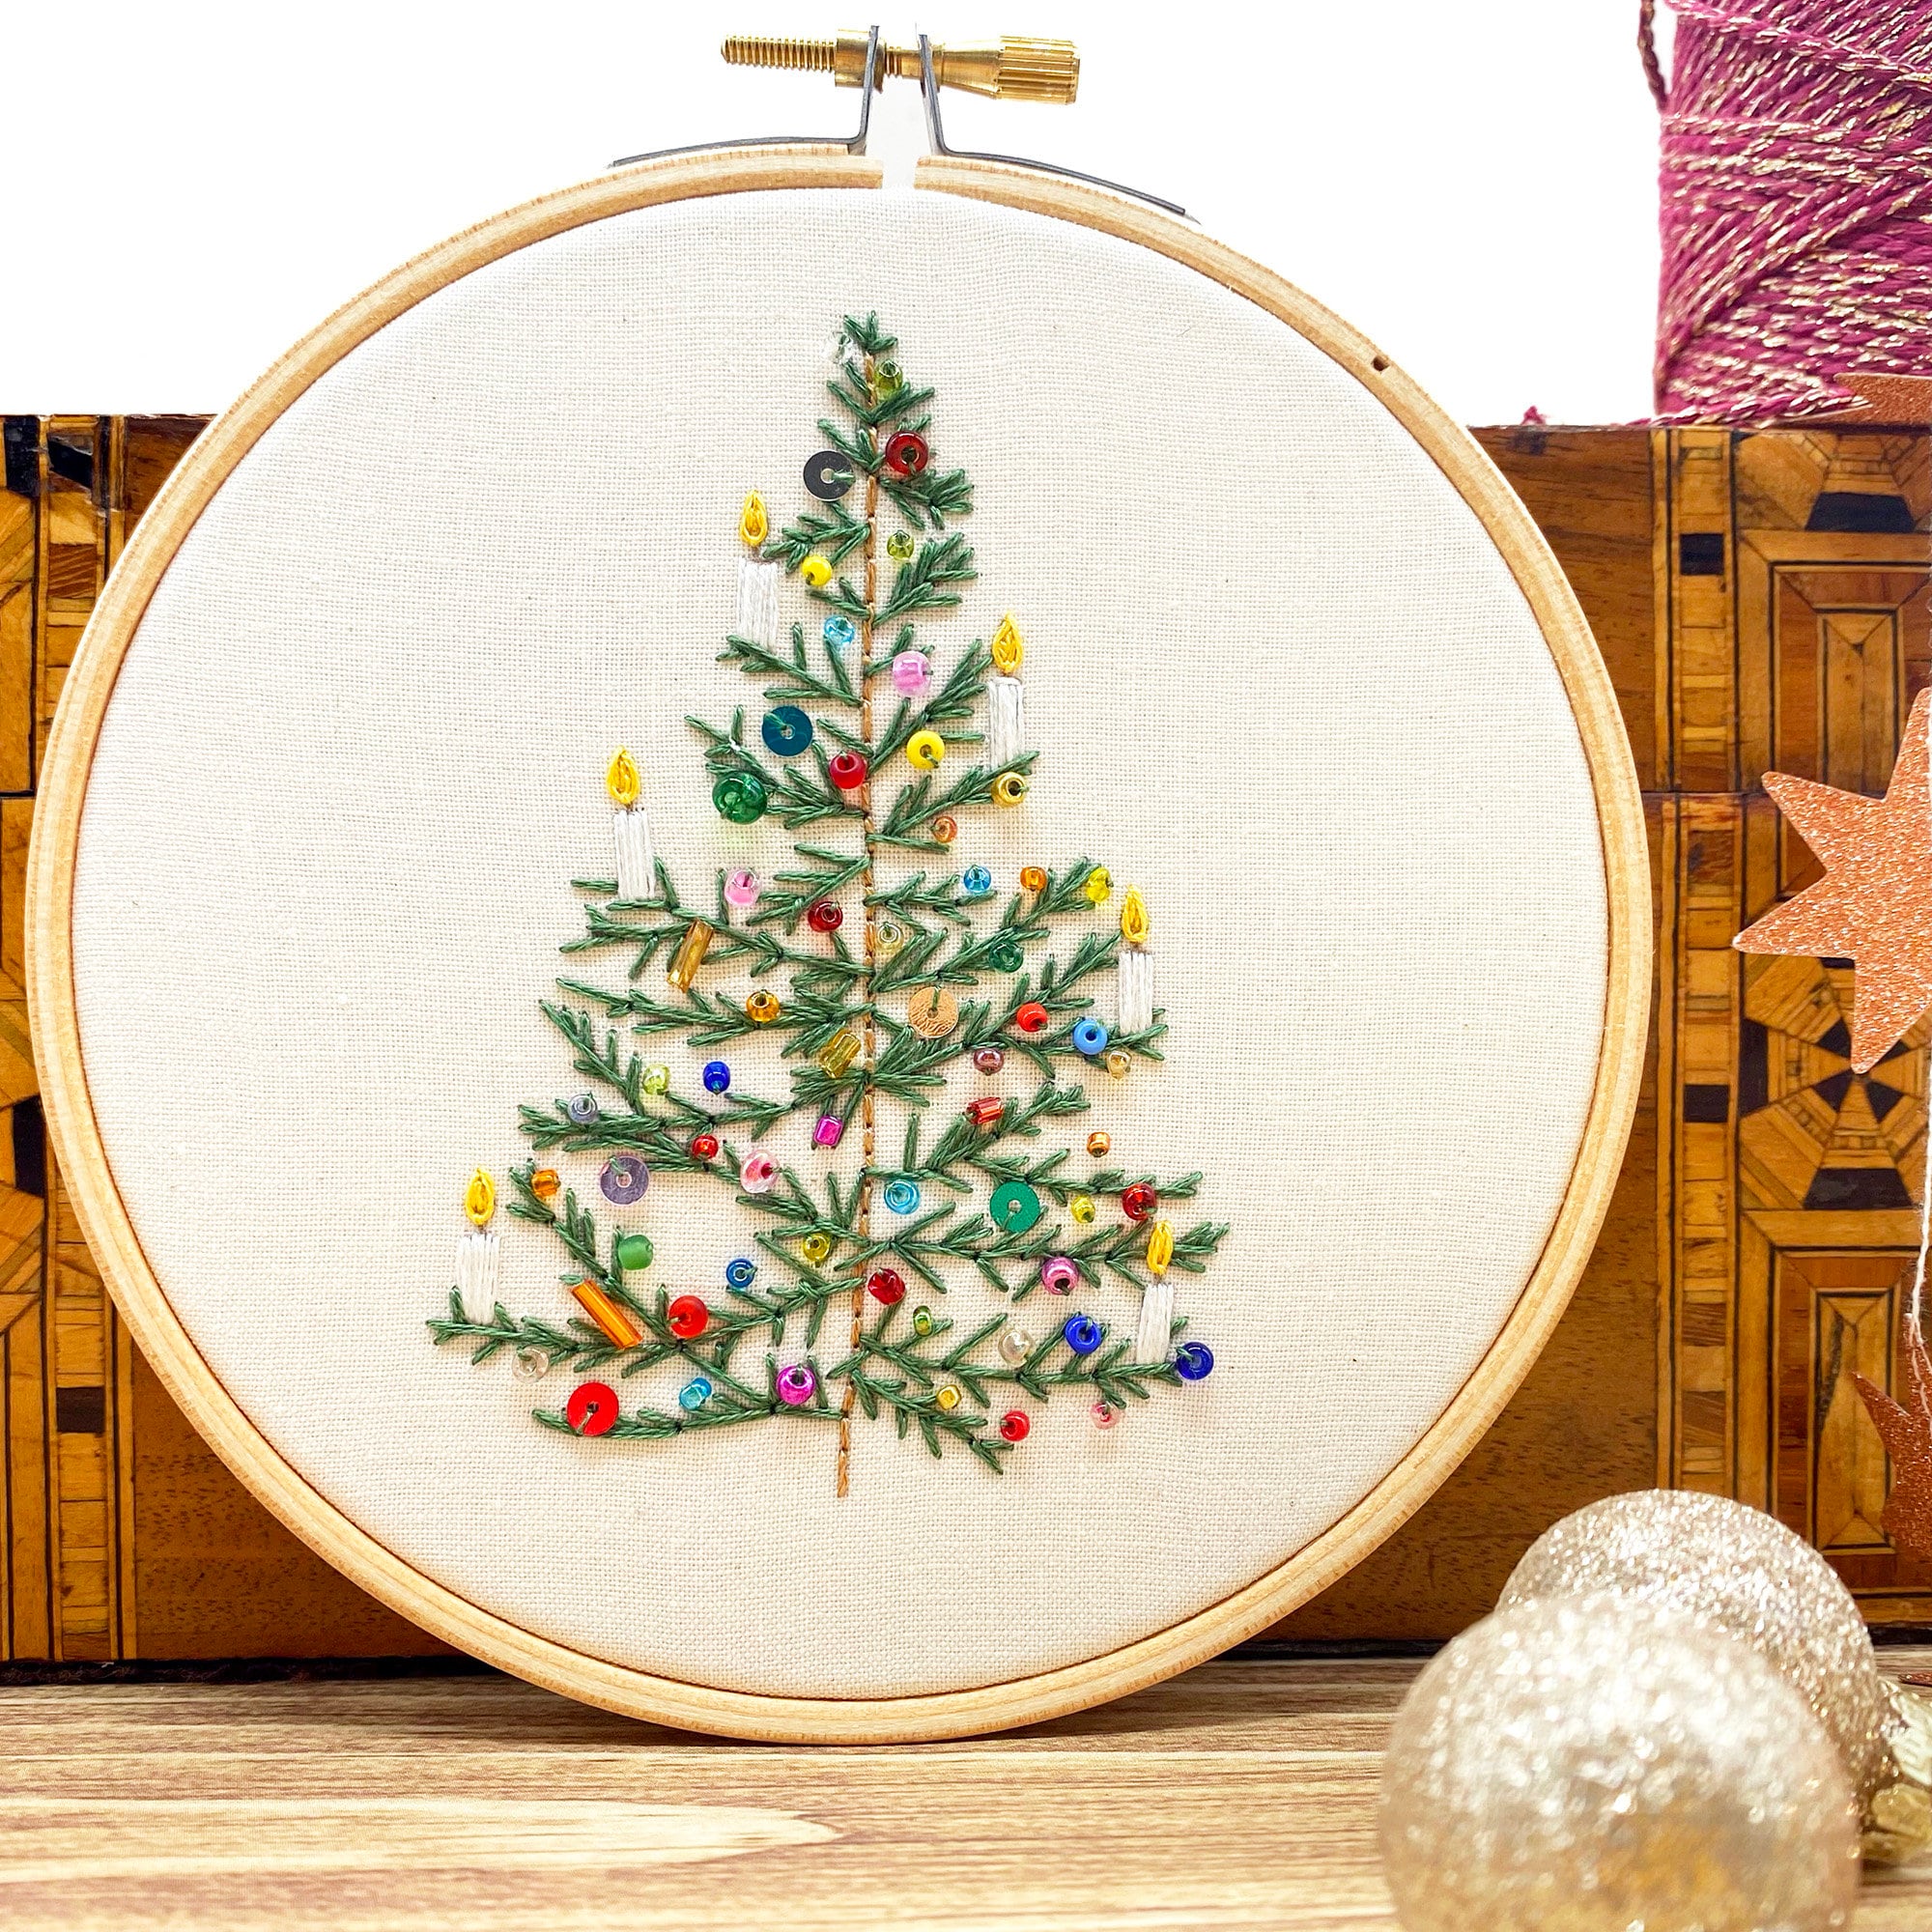 4 pcs Embroidery Starter Kit with Christmas Pattern,Christmas Embroidery  Kit for beginners,DIY Cross Stitch Kits for Adults(4 Embroidery Patterns  and